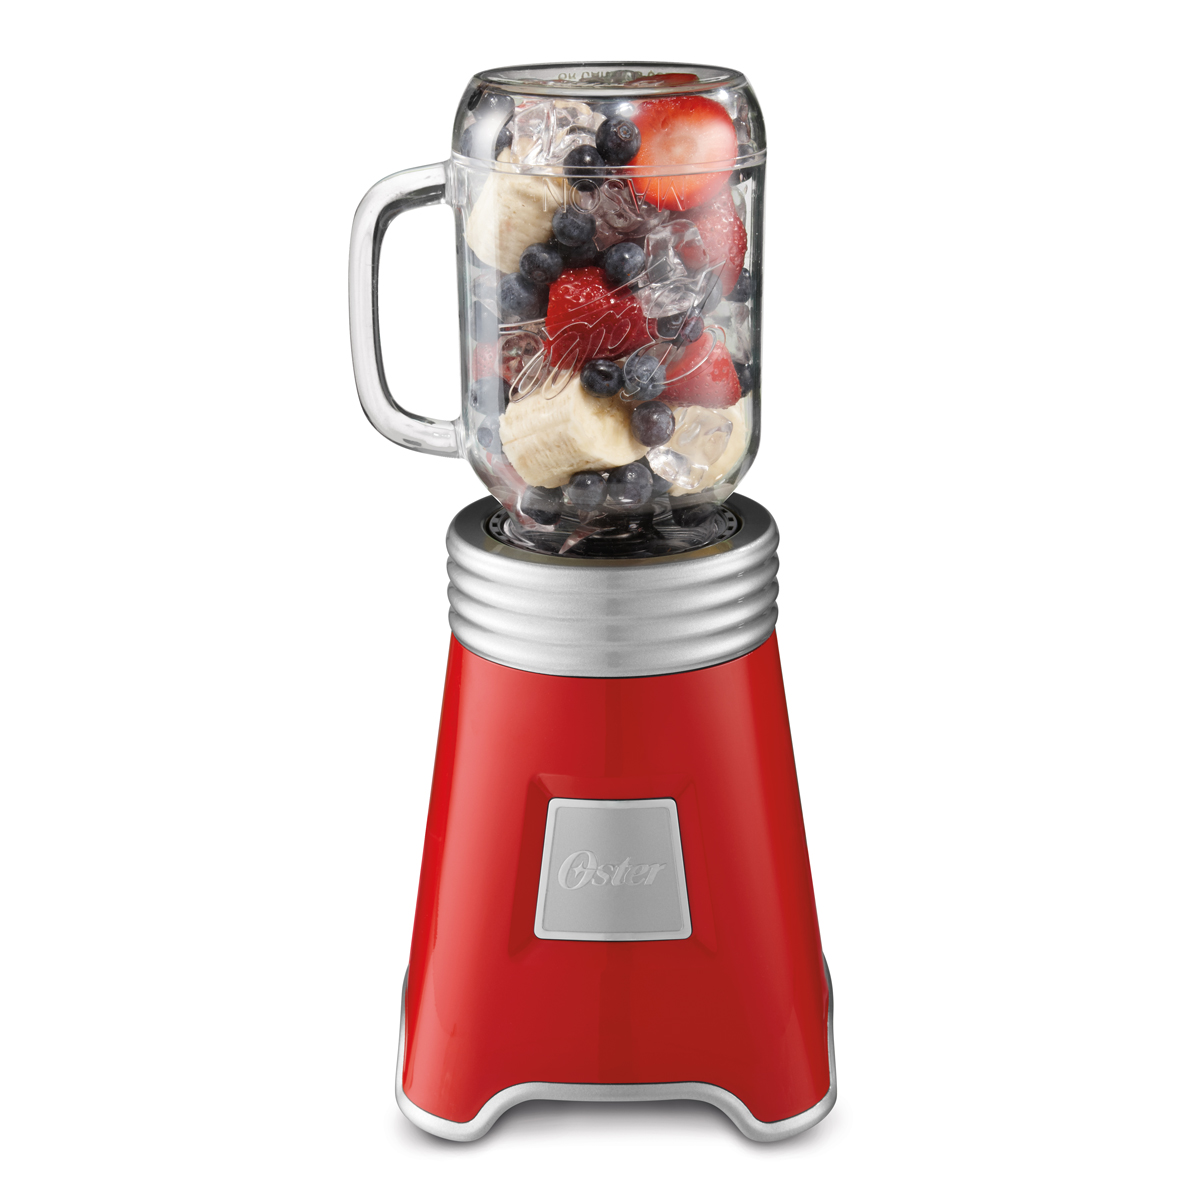 Oster blenders are designed to work with Mason jars. : r